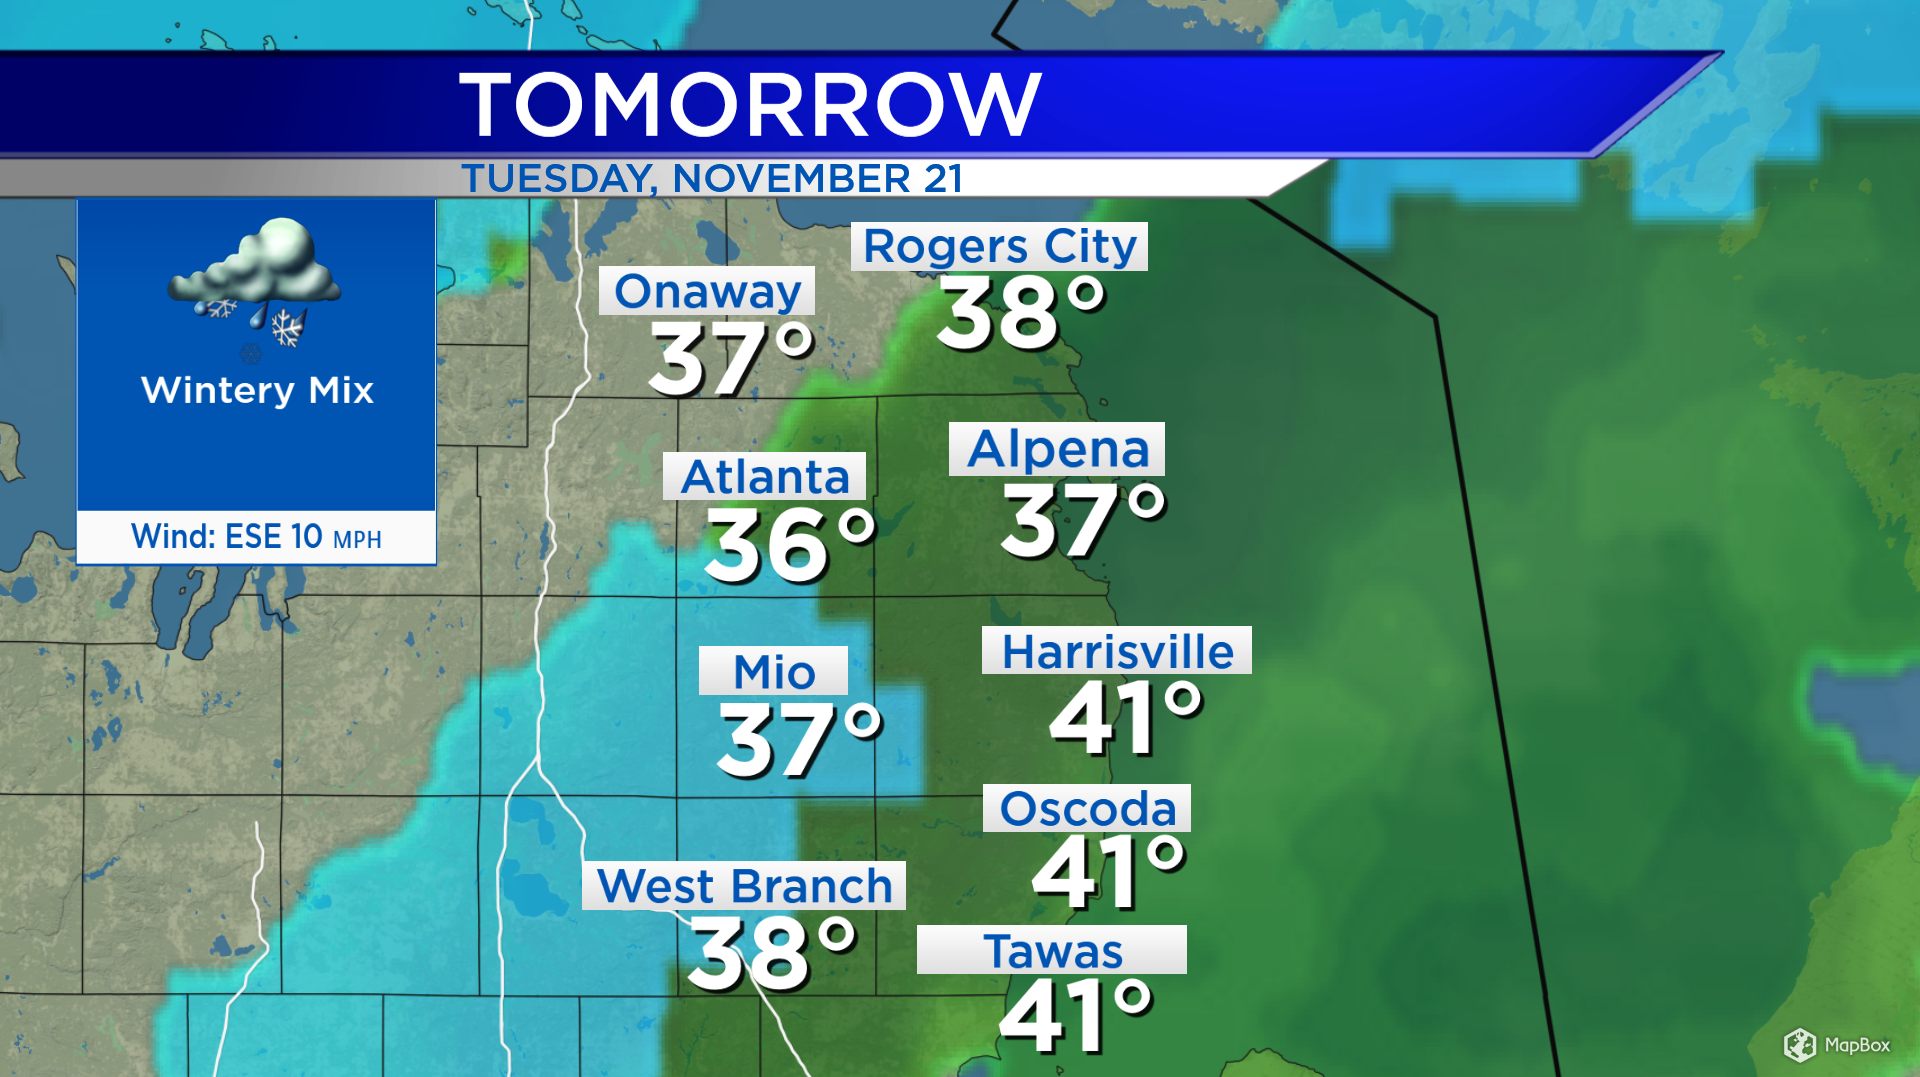 Quick Cool Down And Cloudy Conditions Coming Tuesday - CBS Colorado